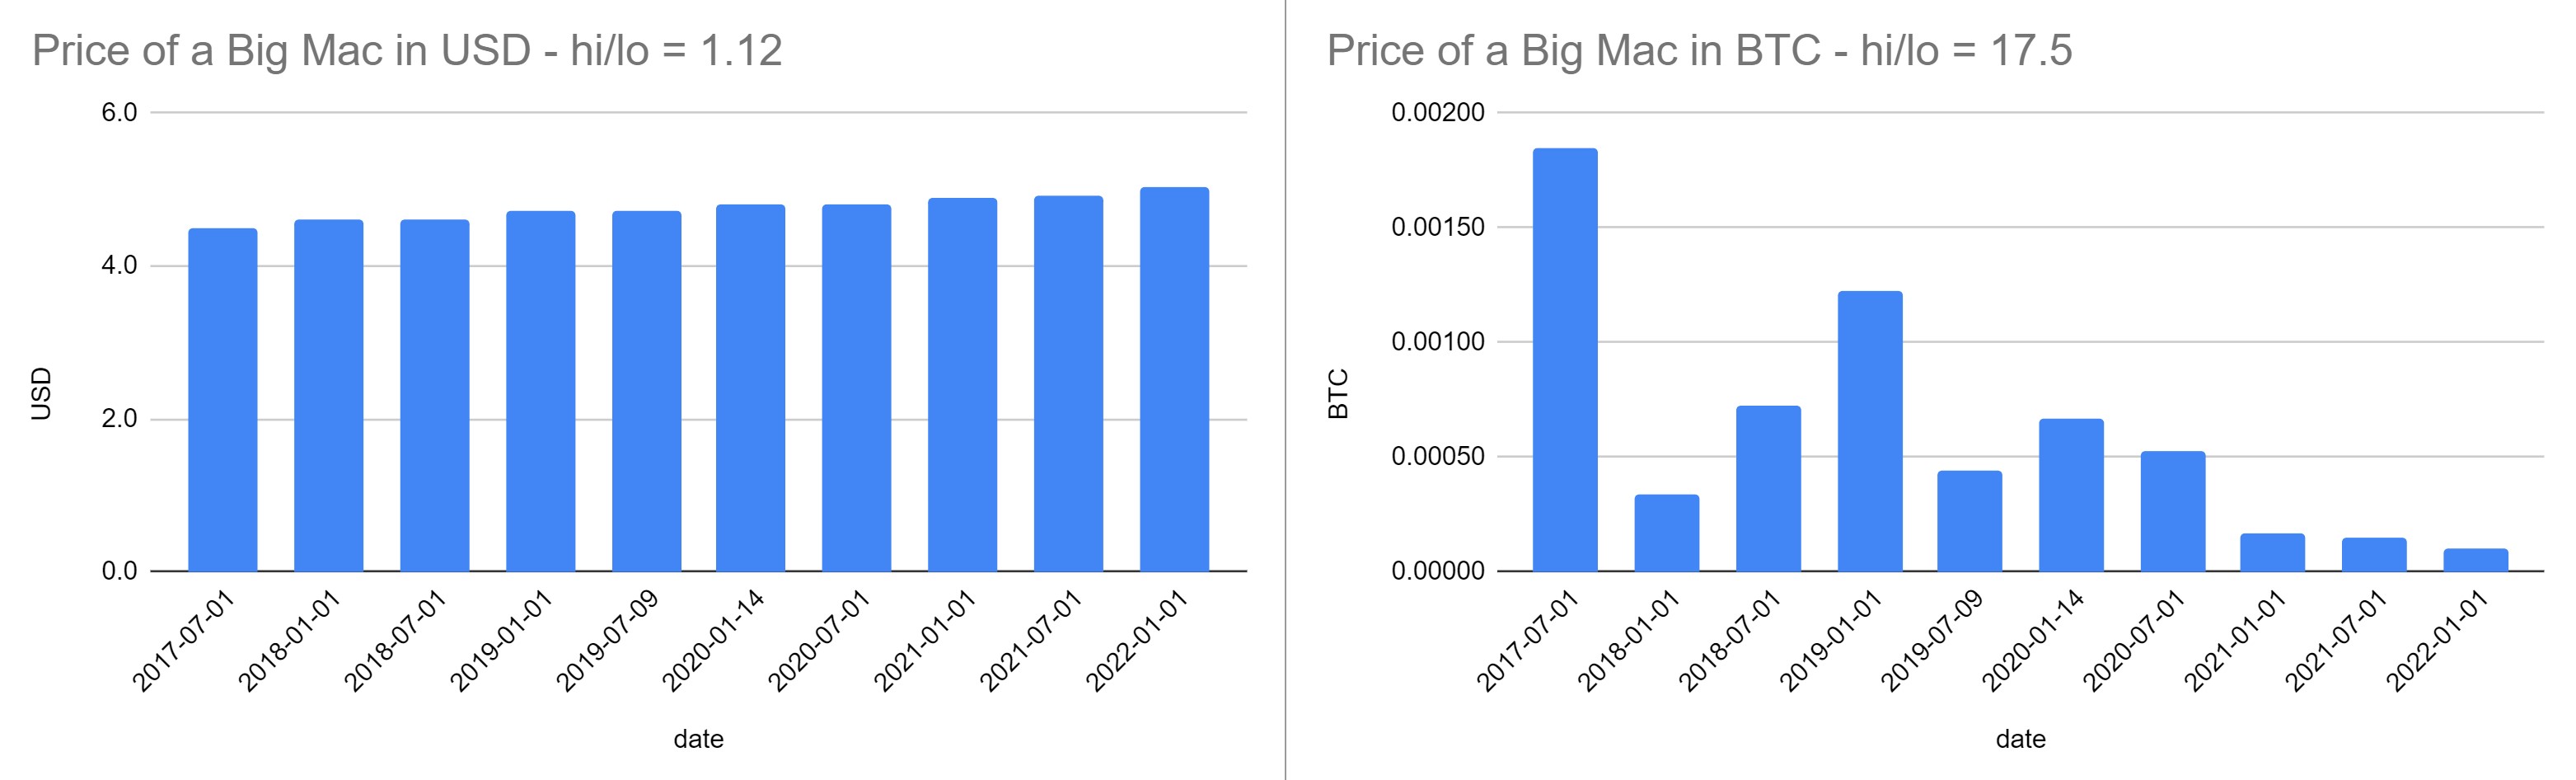 Price of a Big Mac in BTC and USD